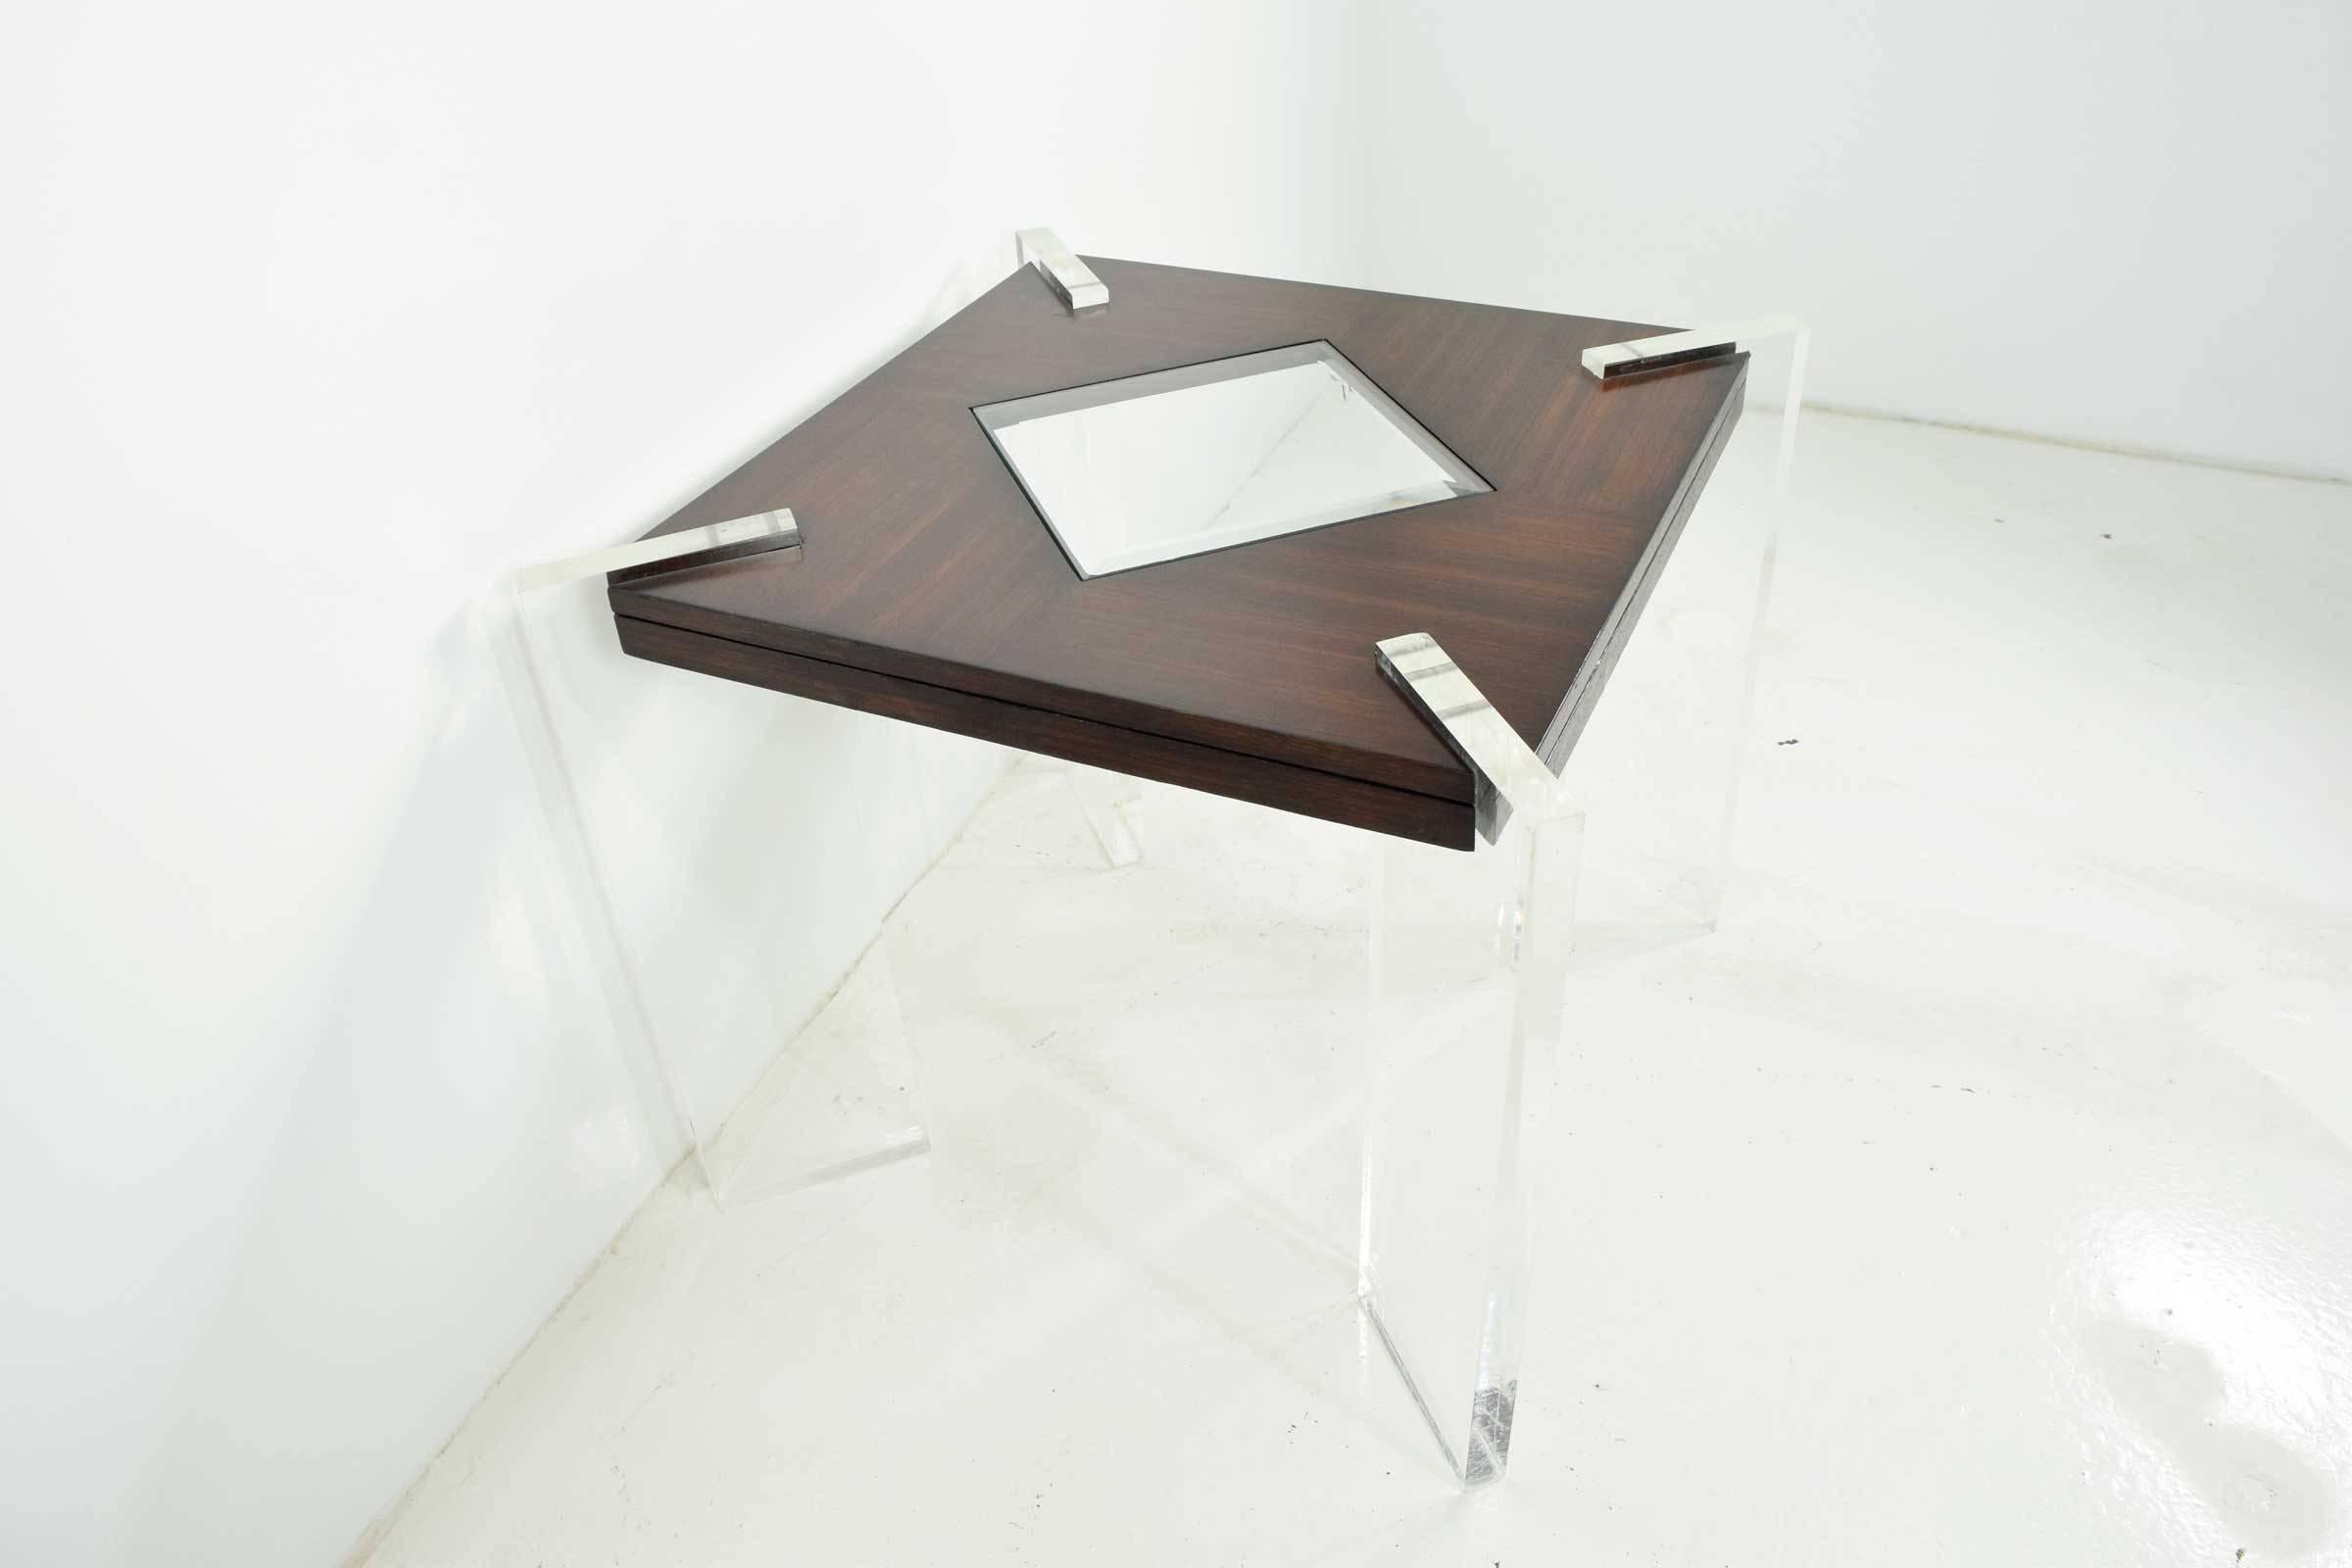 American Side Table